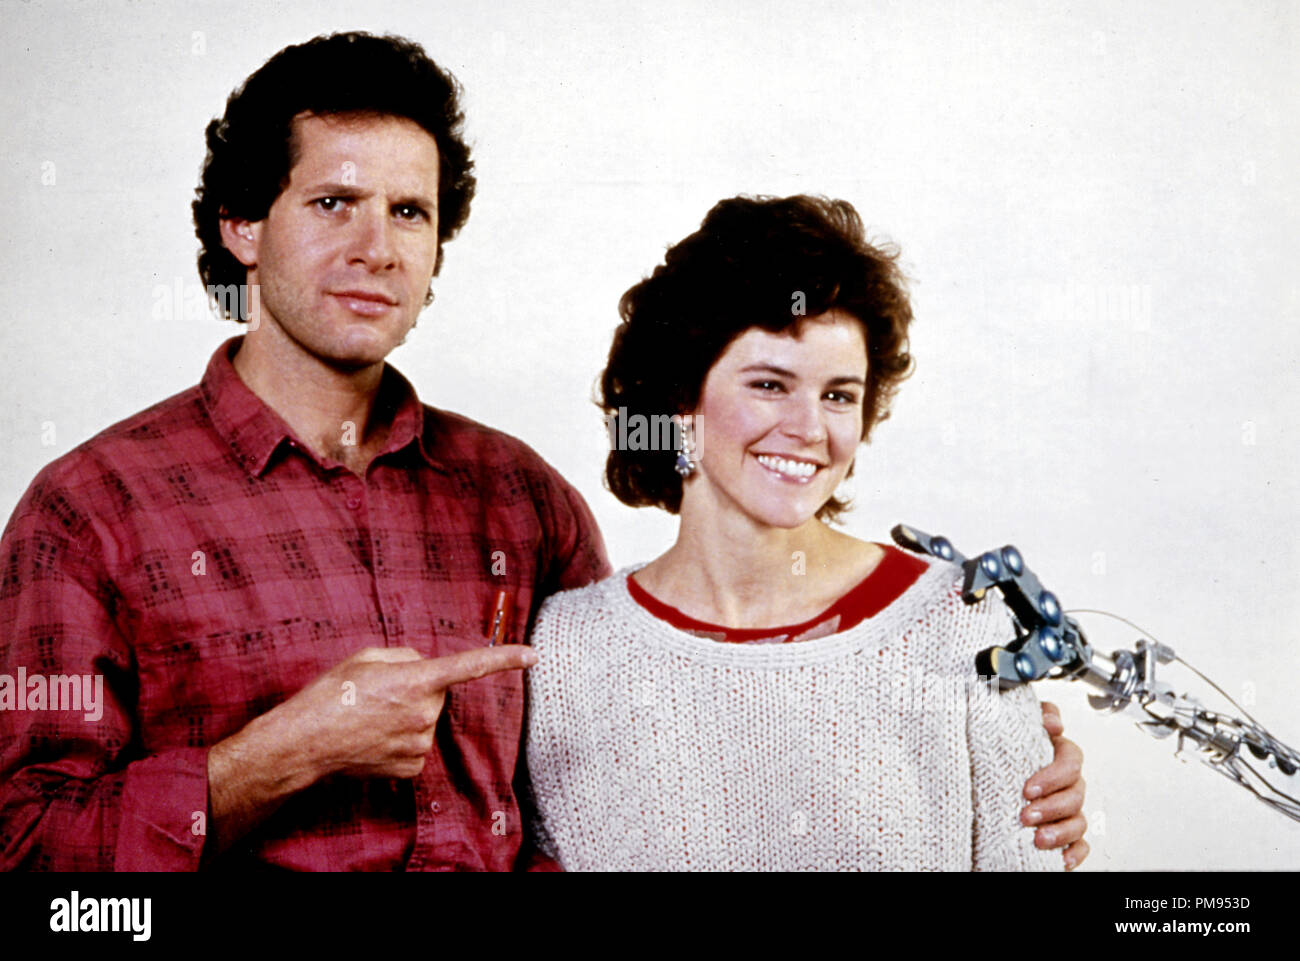 Studio Publicity Still from 'Short Circuit' Steve Guttenberg, Ally Sheedy © 1986 Tri Star  All Rights Reserved   File Reference # 31700108THA  For Editorial Use Only Stock Photo